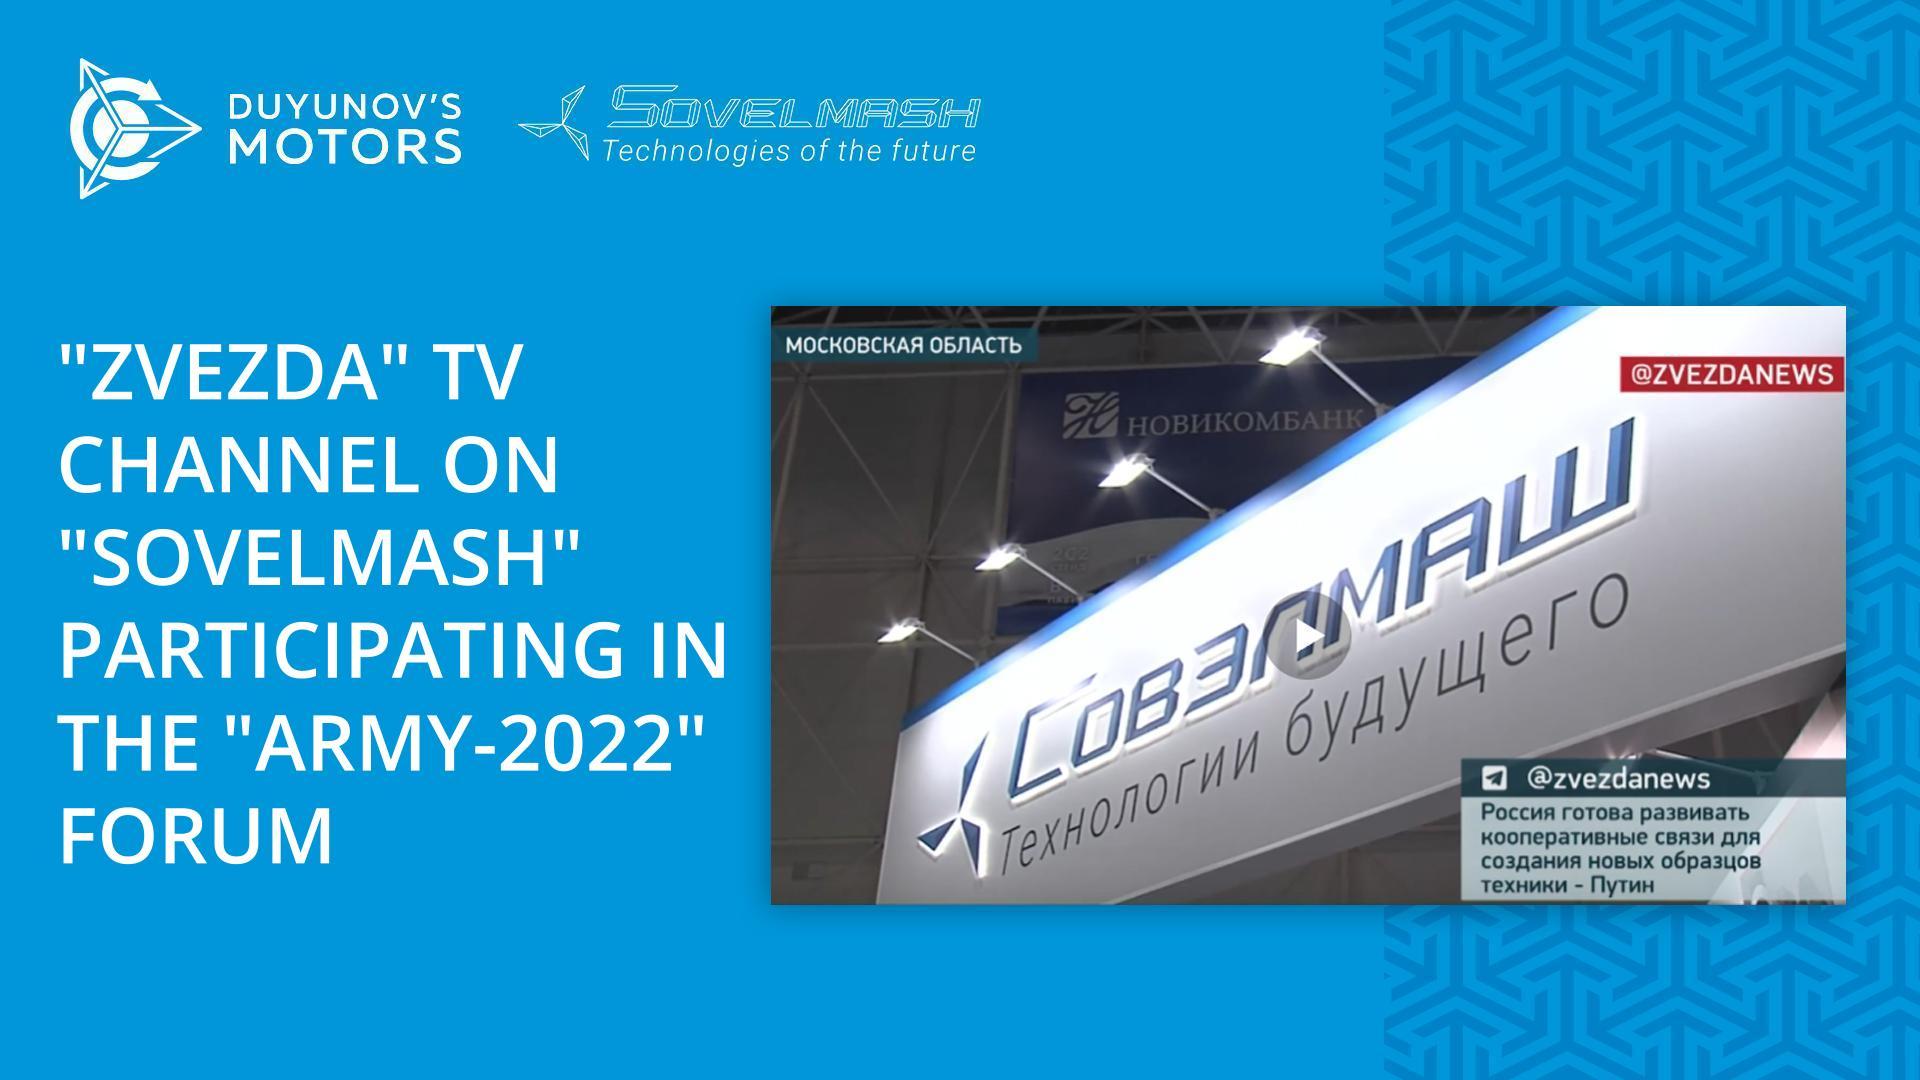 "Zvezda" TV channel about "Sovelmash" participating in the "Army-2022" forum